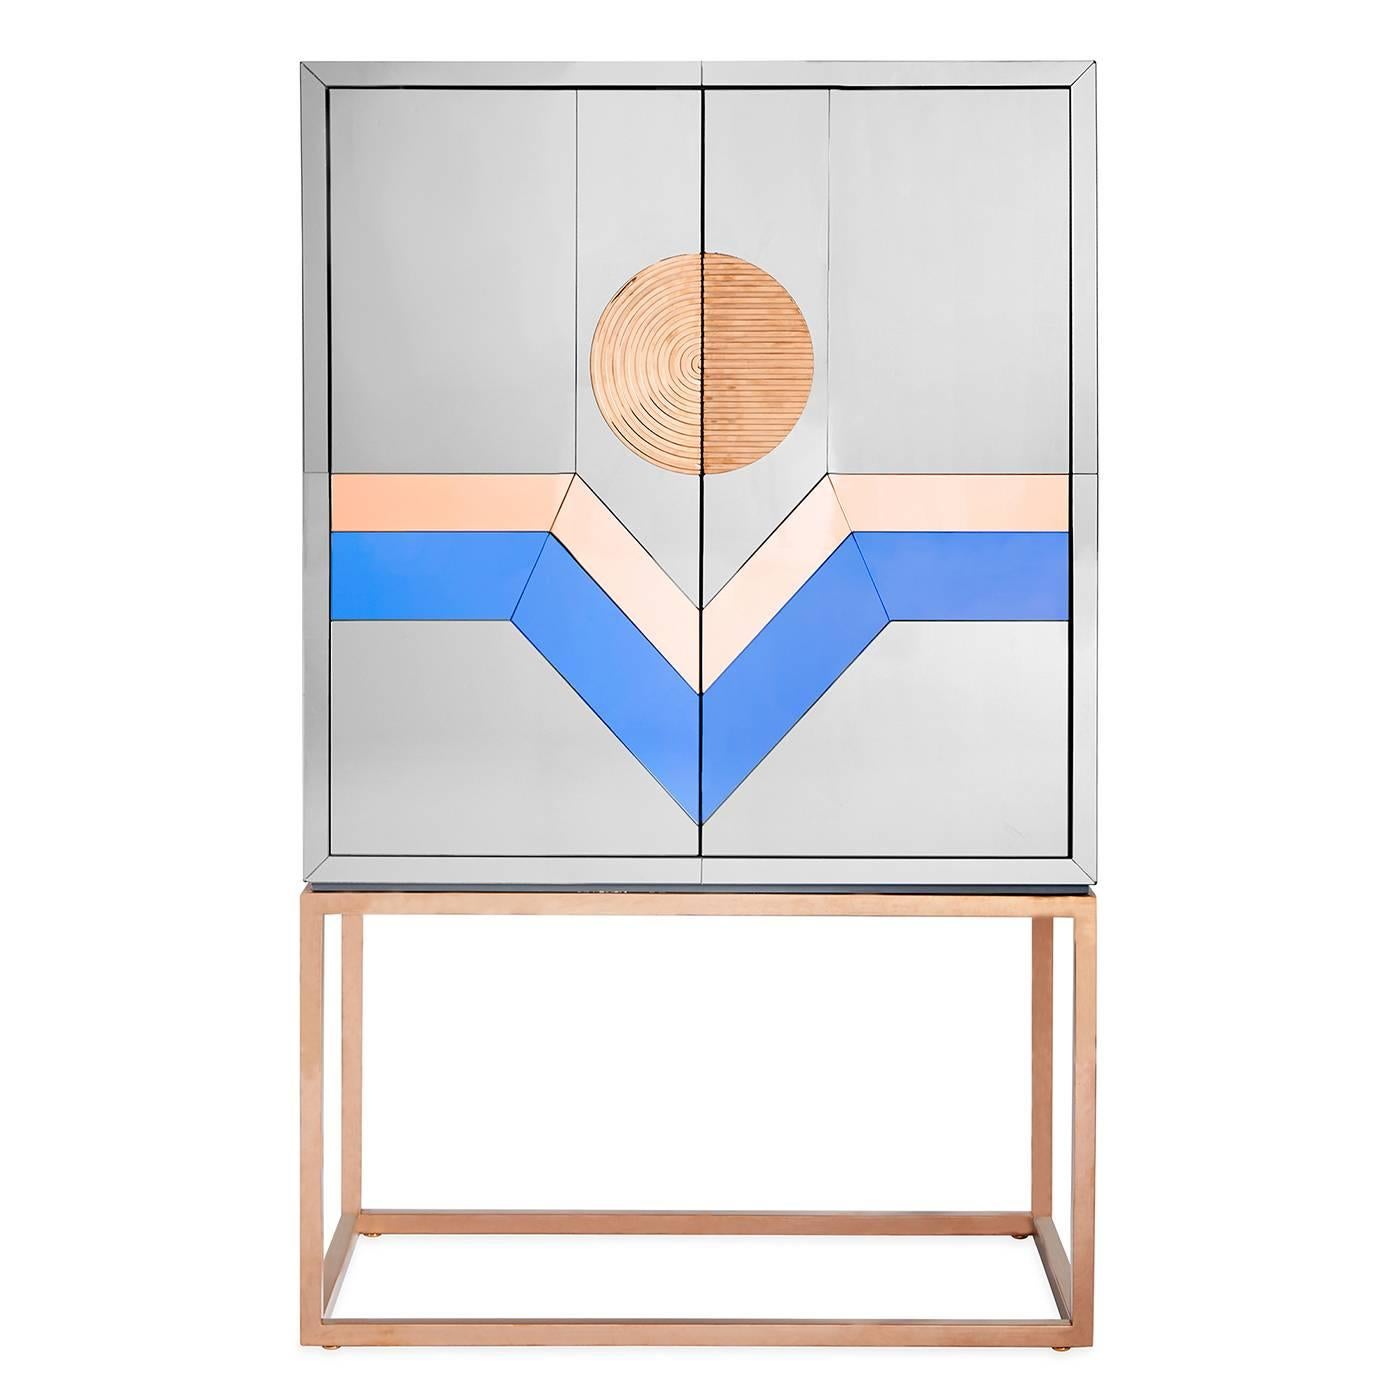 Avant antique. With a nod to neo-Memphis style and a wink of modern American glamour, our nouvelle bar is the most cutting edge spot to mix a drink. Featuring a mirrored case in tones of smoke, cobalt, and copper perched on a Minimalist cube base